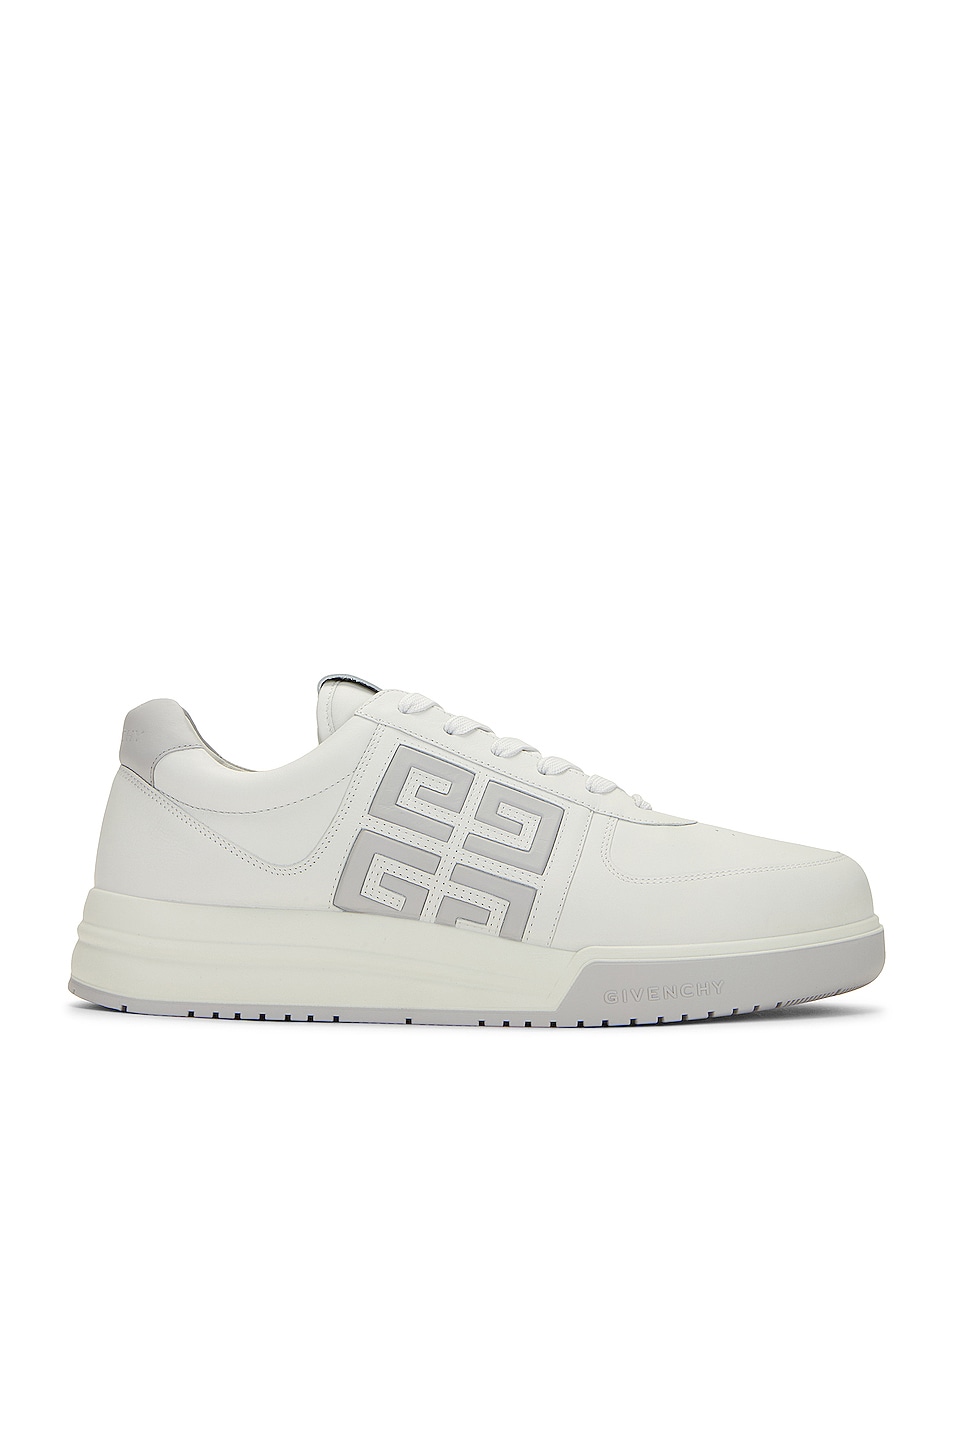 Image 1 of Givenchy G4 Low Top Sneaker in White & Grey